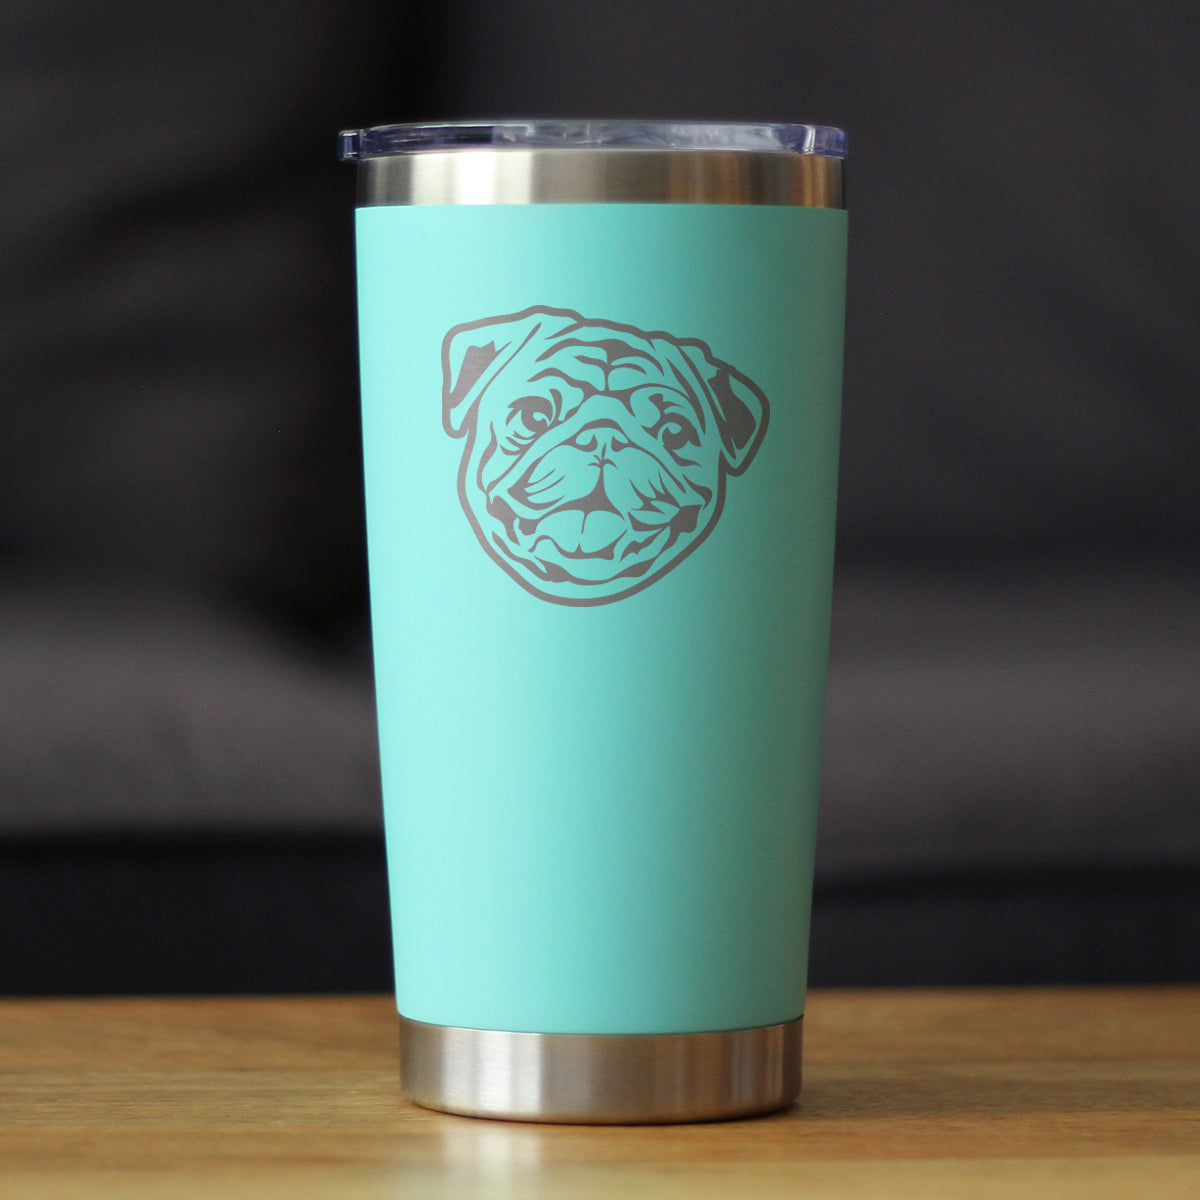 Pug - Insulated Coffee Tumbler Cup with Sliding Lid - Stainless Steel Insulated Mug - Cute Pug Themed Gift for Men and Women